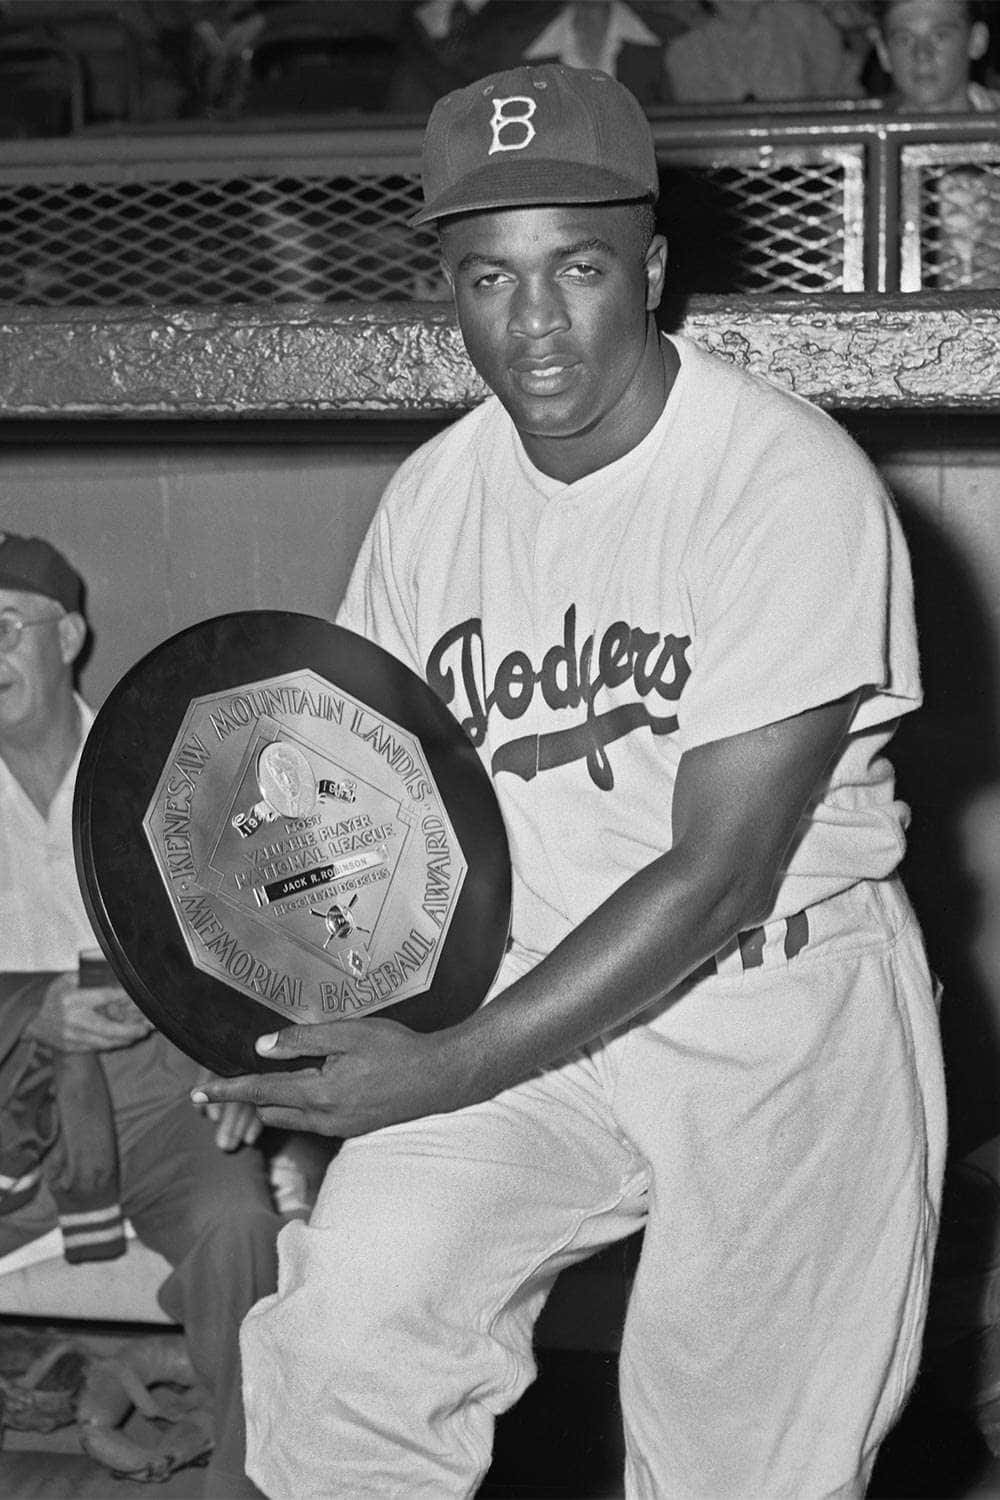 Jackie Robinson: Brooklyn Dodgers legend and civil rights pioneer